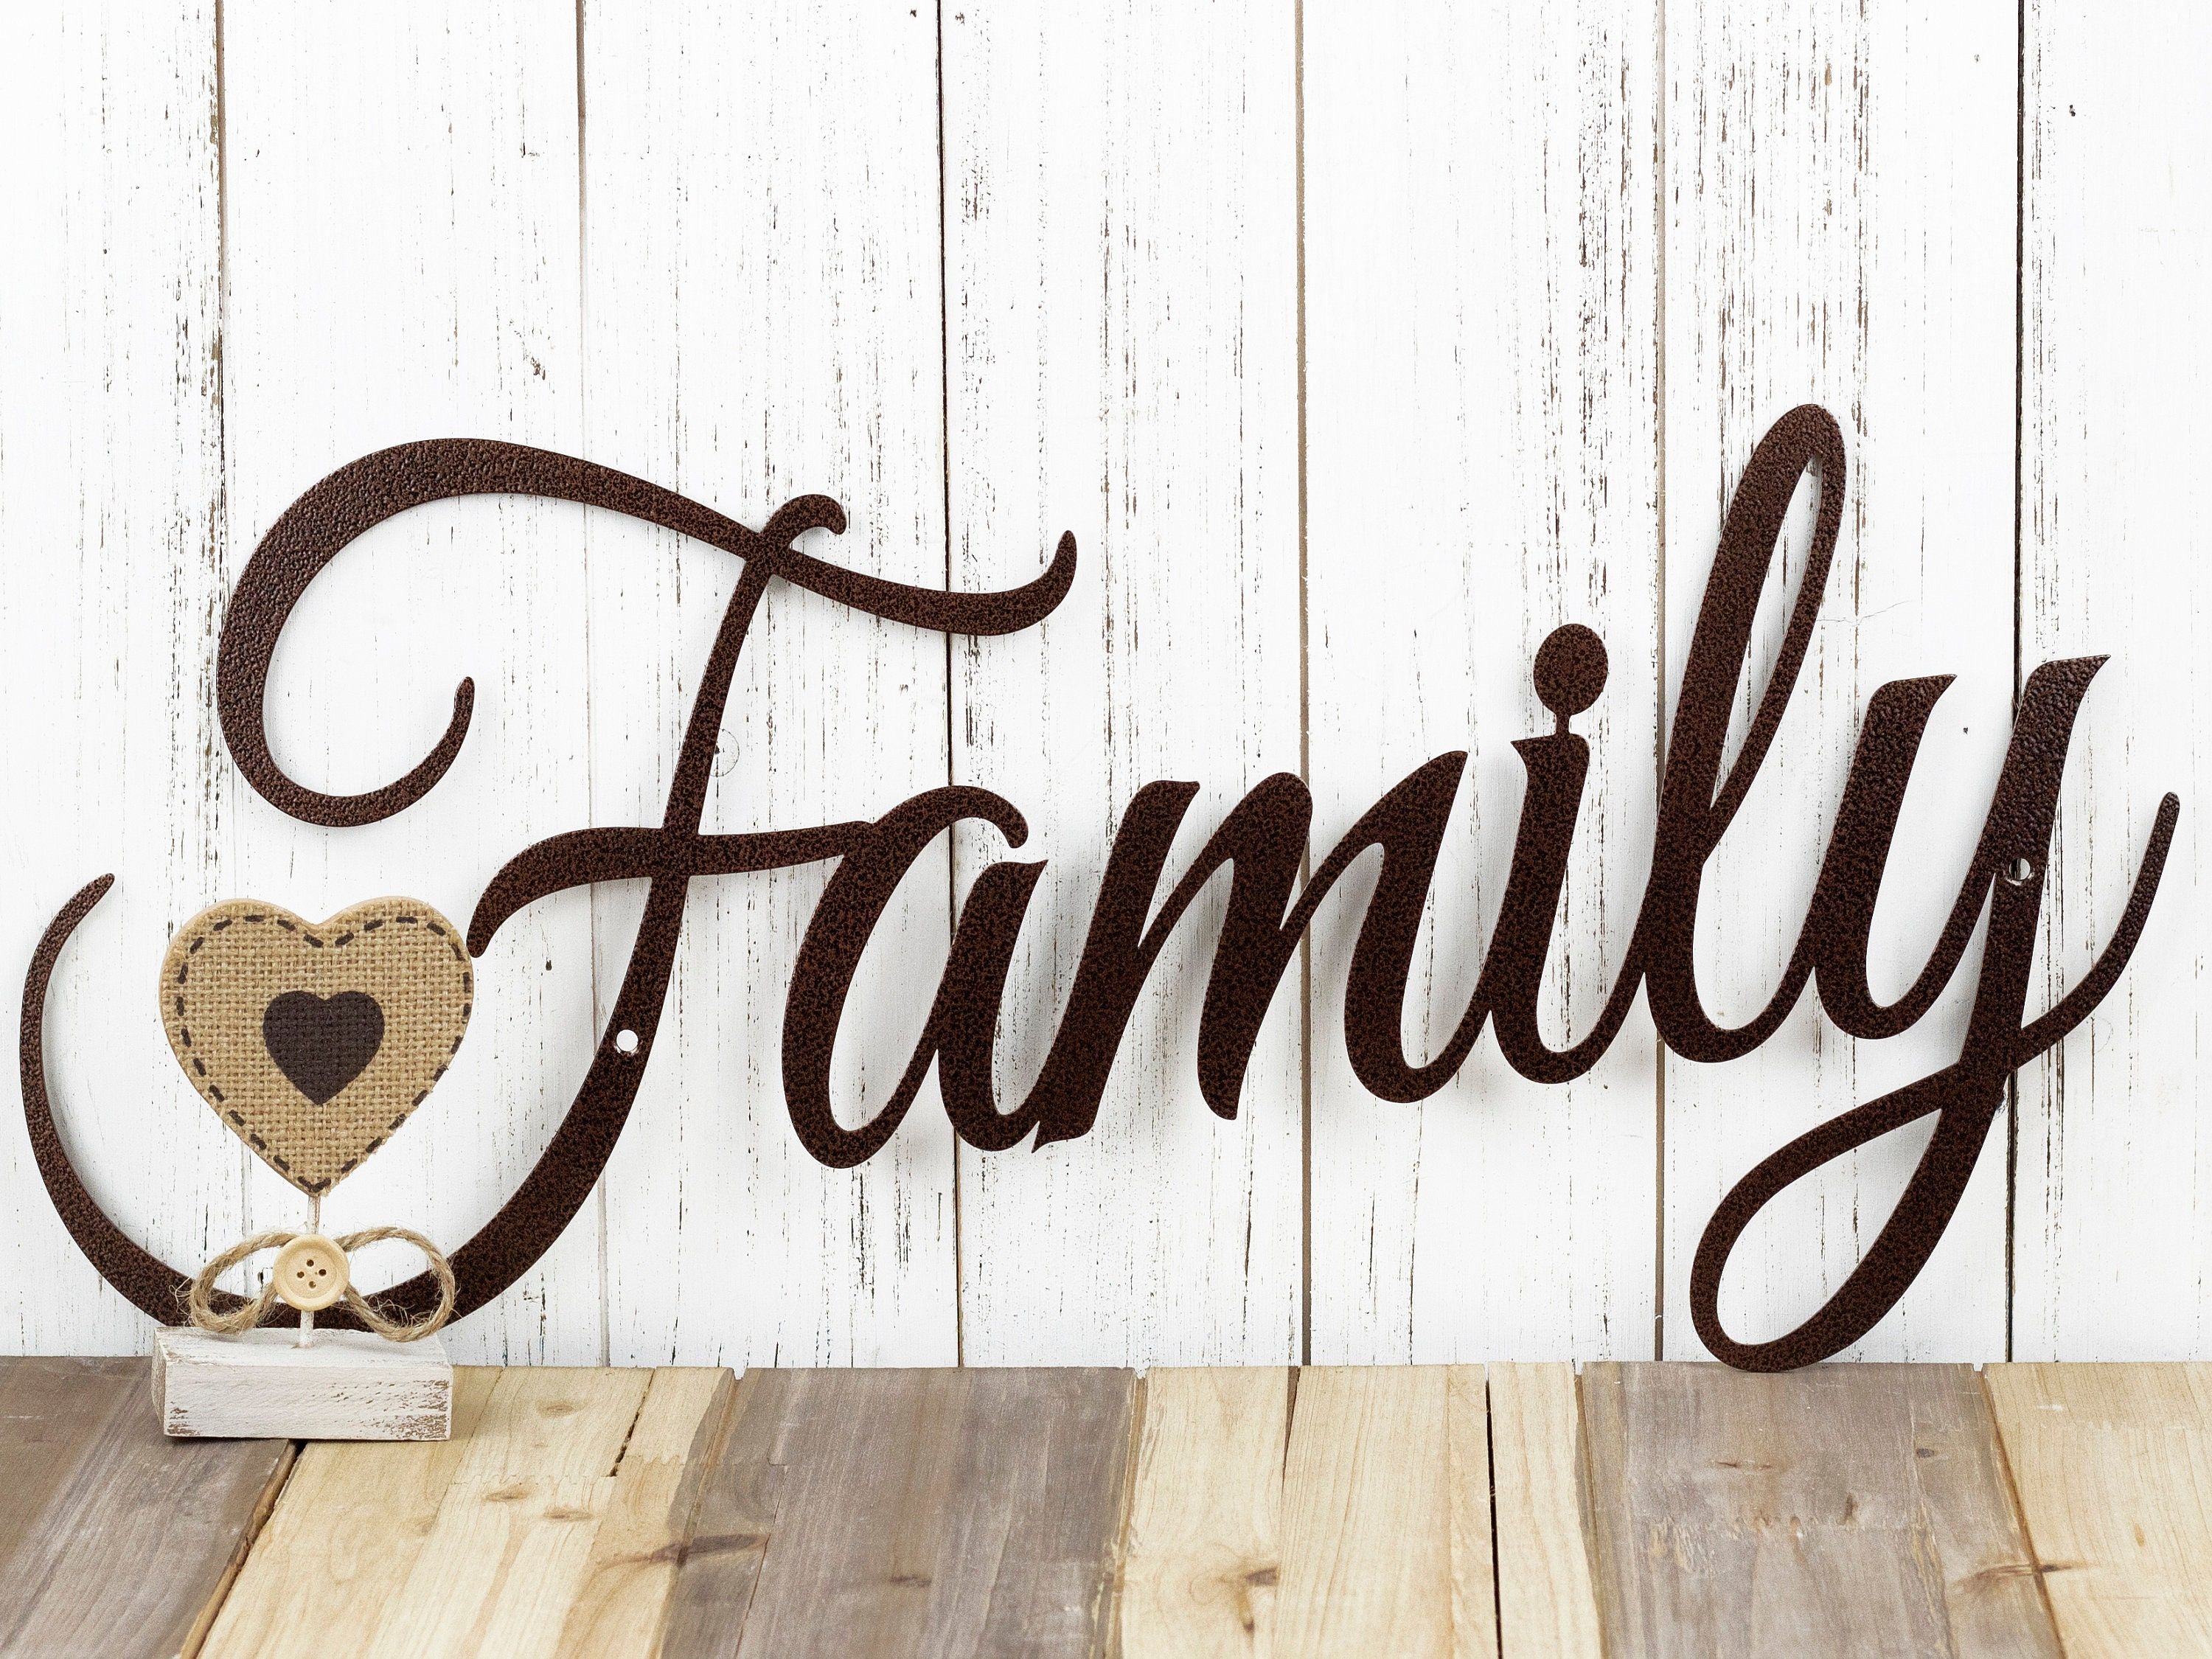 Metal Family Sign Metal Word Art Steel Signs Wall Hanging – Etsy Inside Recent Family Wall Sign Metal (View 17 of 20)